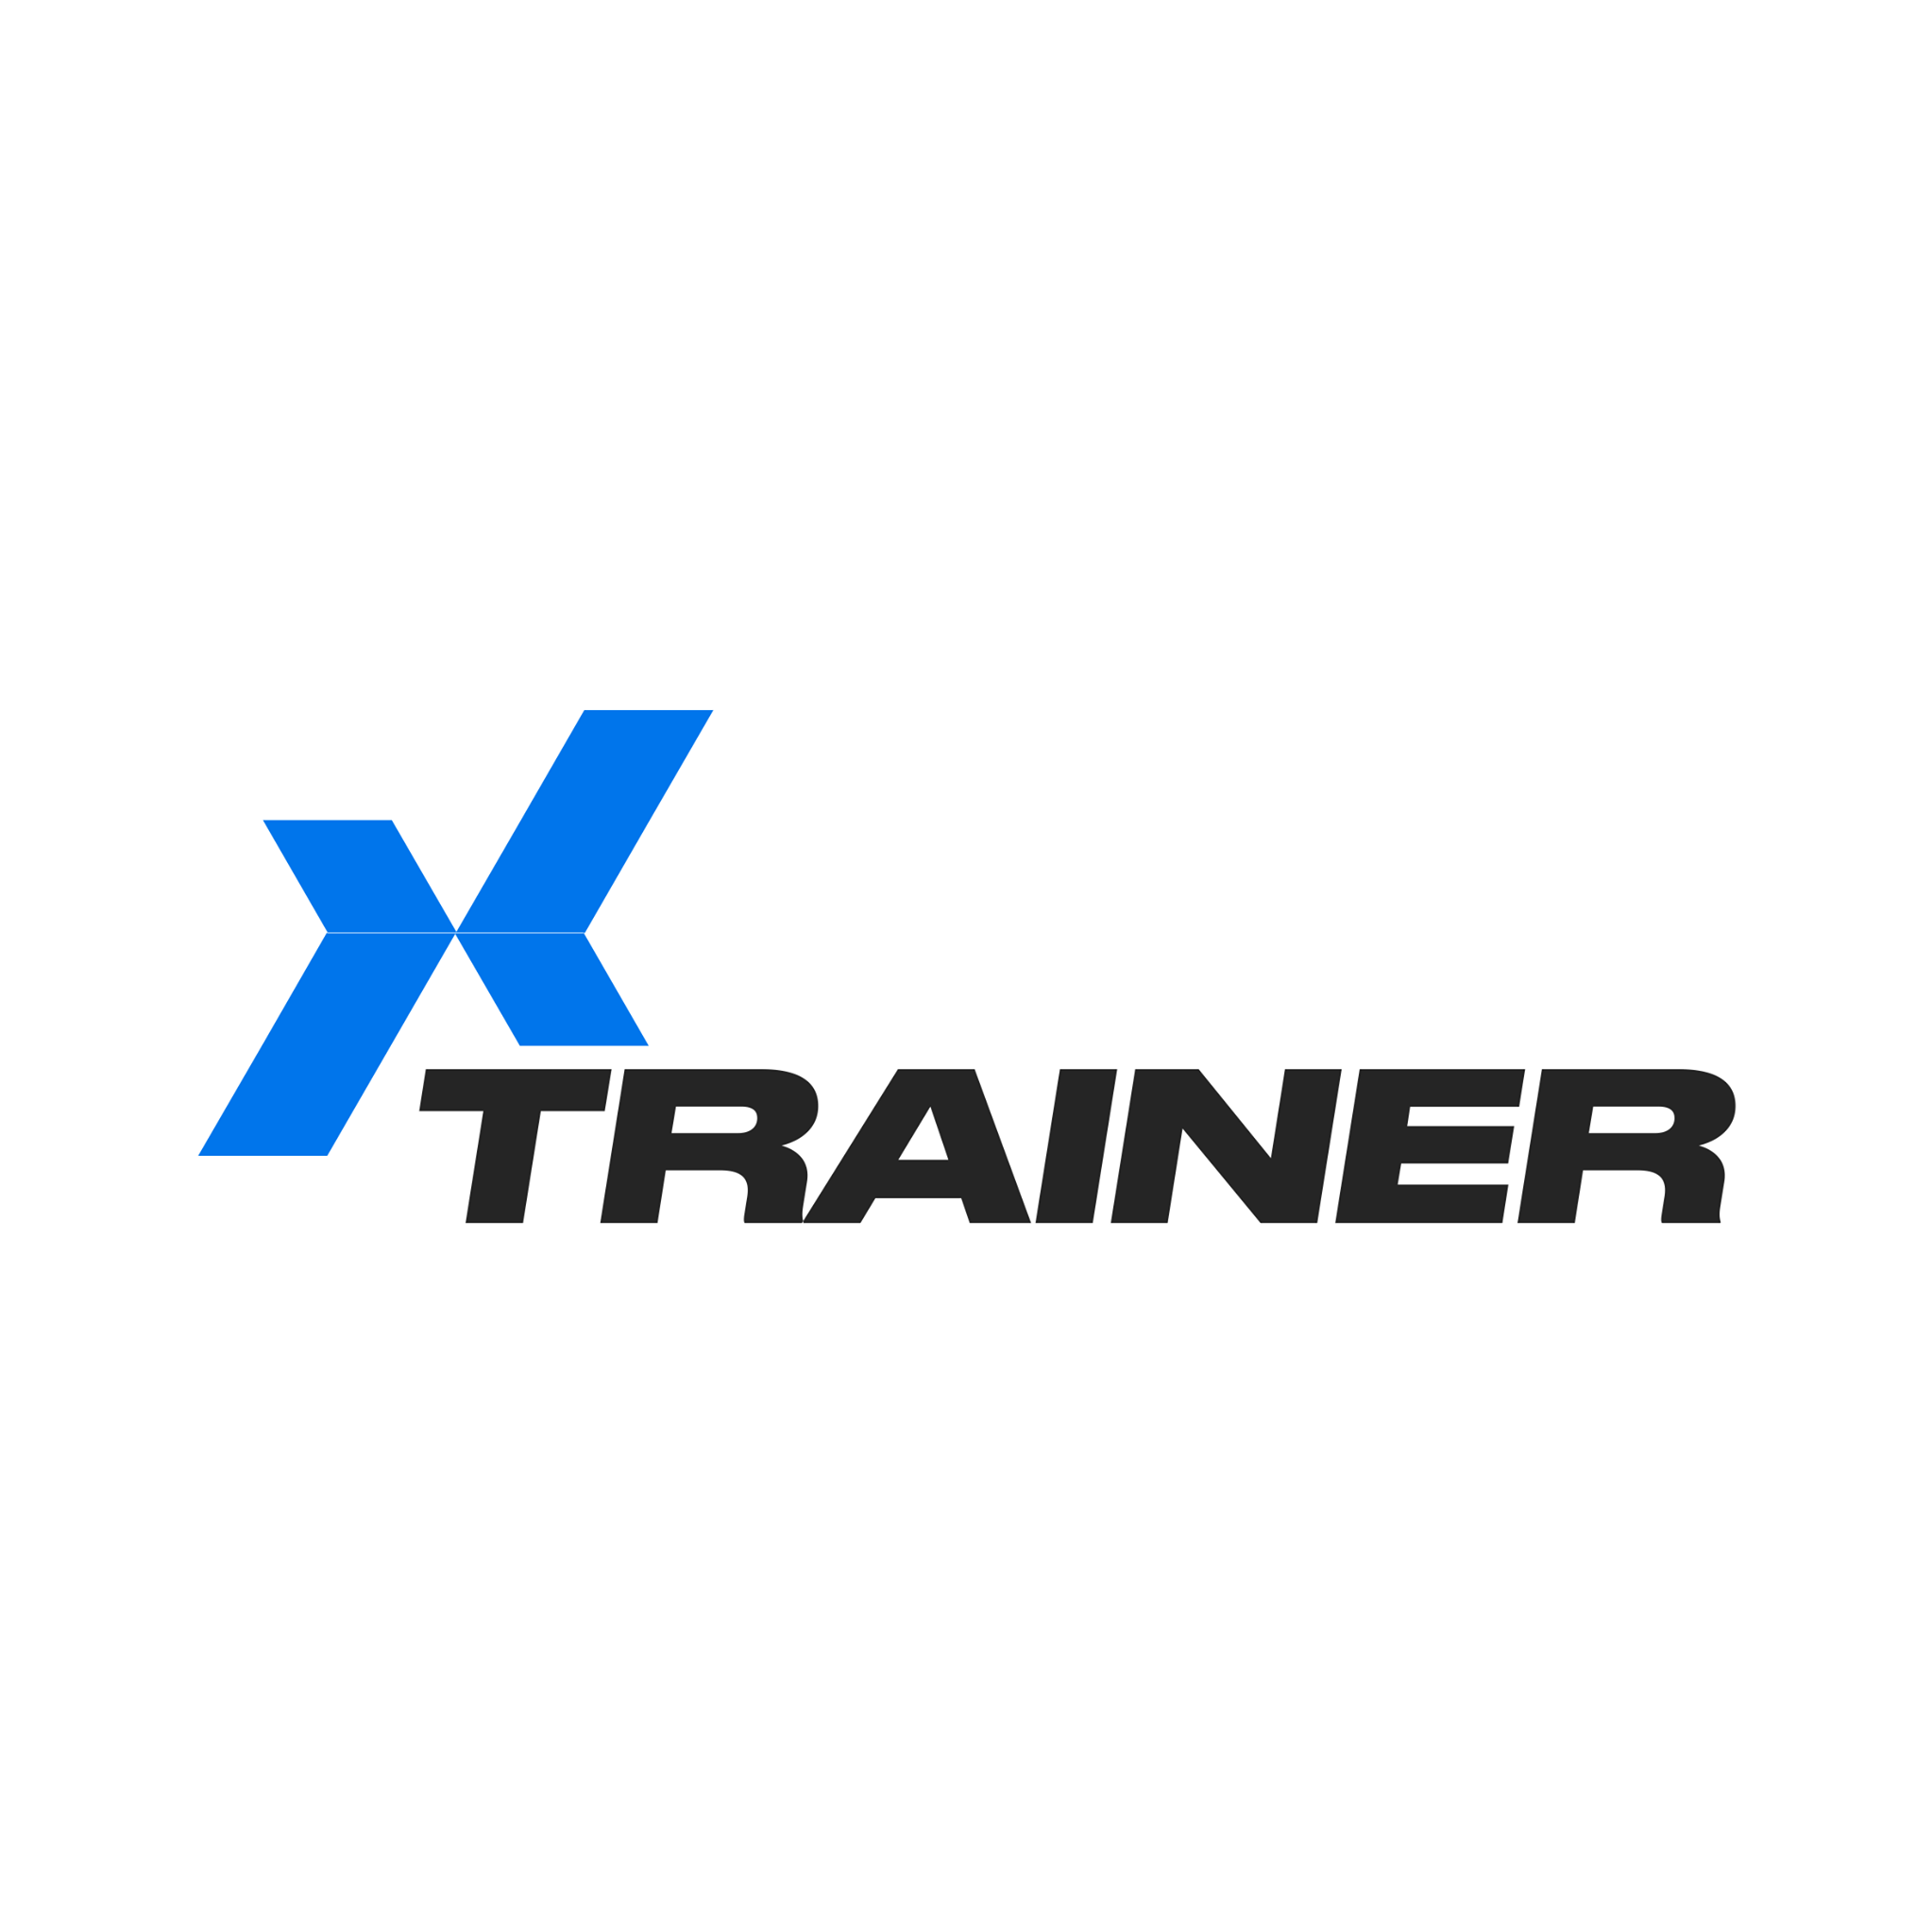 XTrainer-product that we work on as software development agency